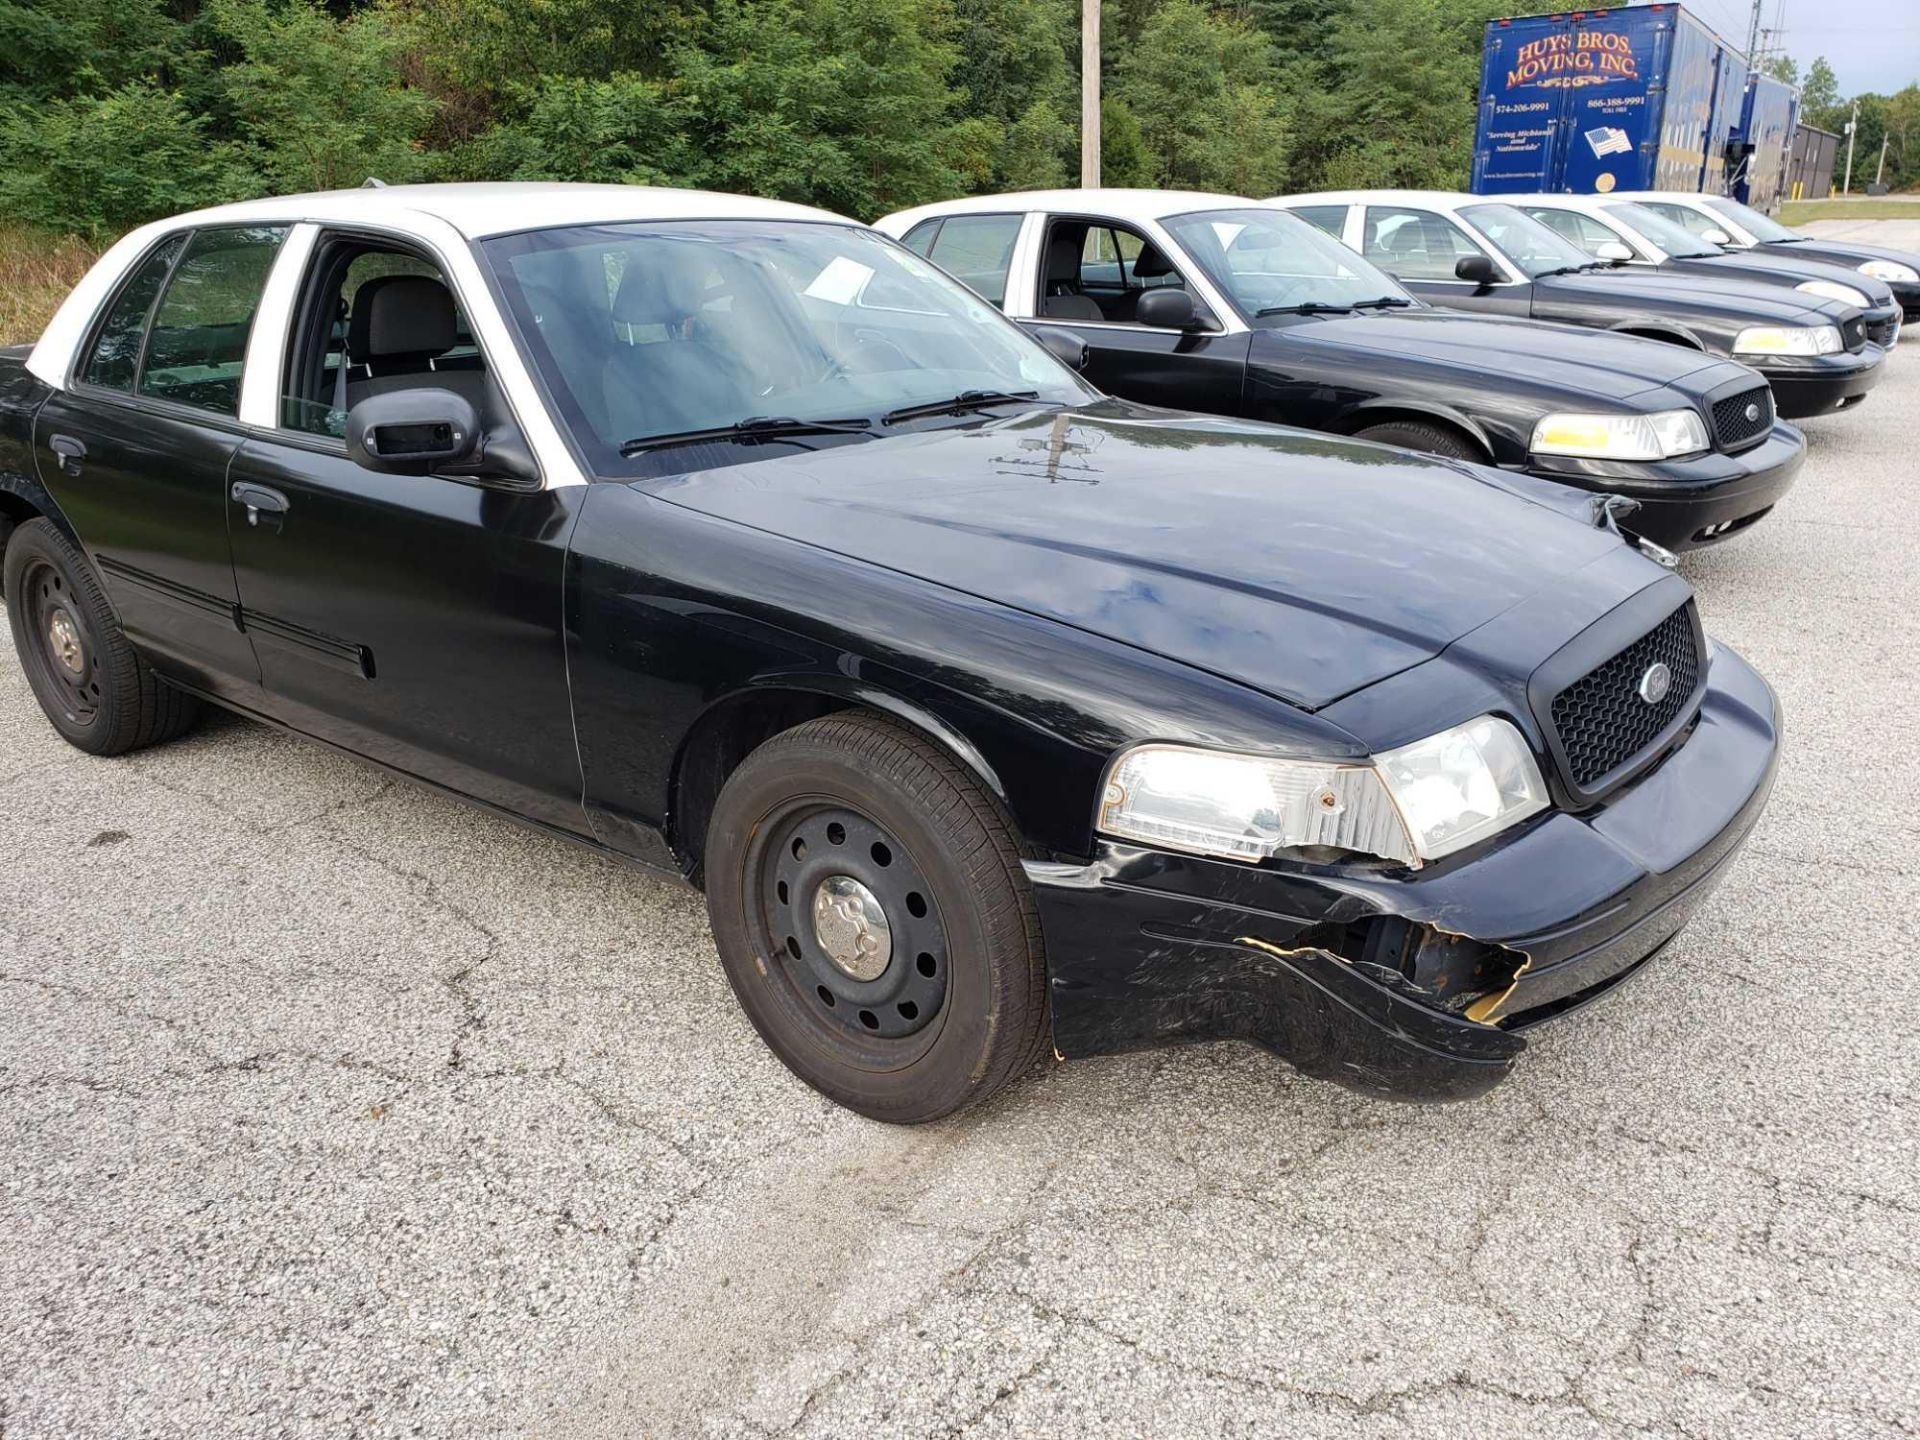 008 Ford Crown Victoria. VIN 2FAHP71V09X112075. Police Interceptor. 123,233 miles showing. - Image 5 of 19